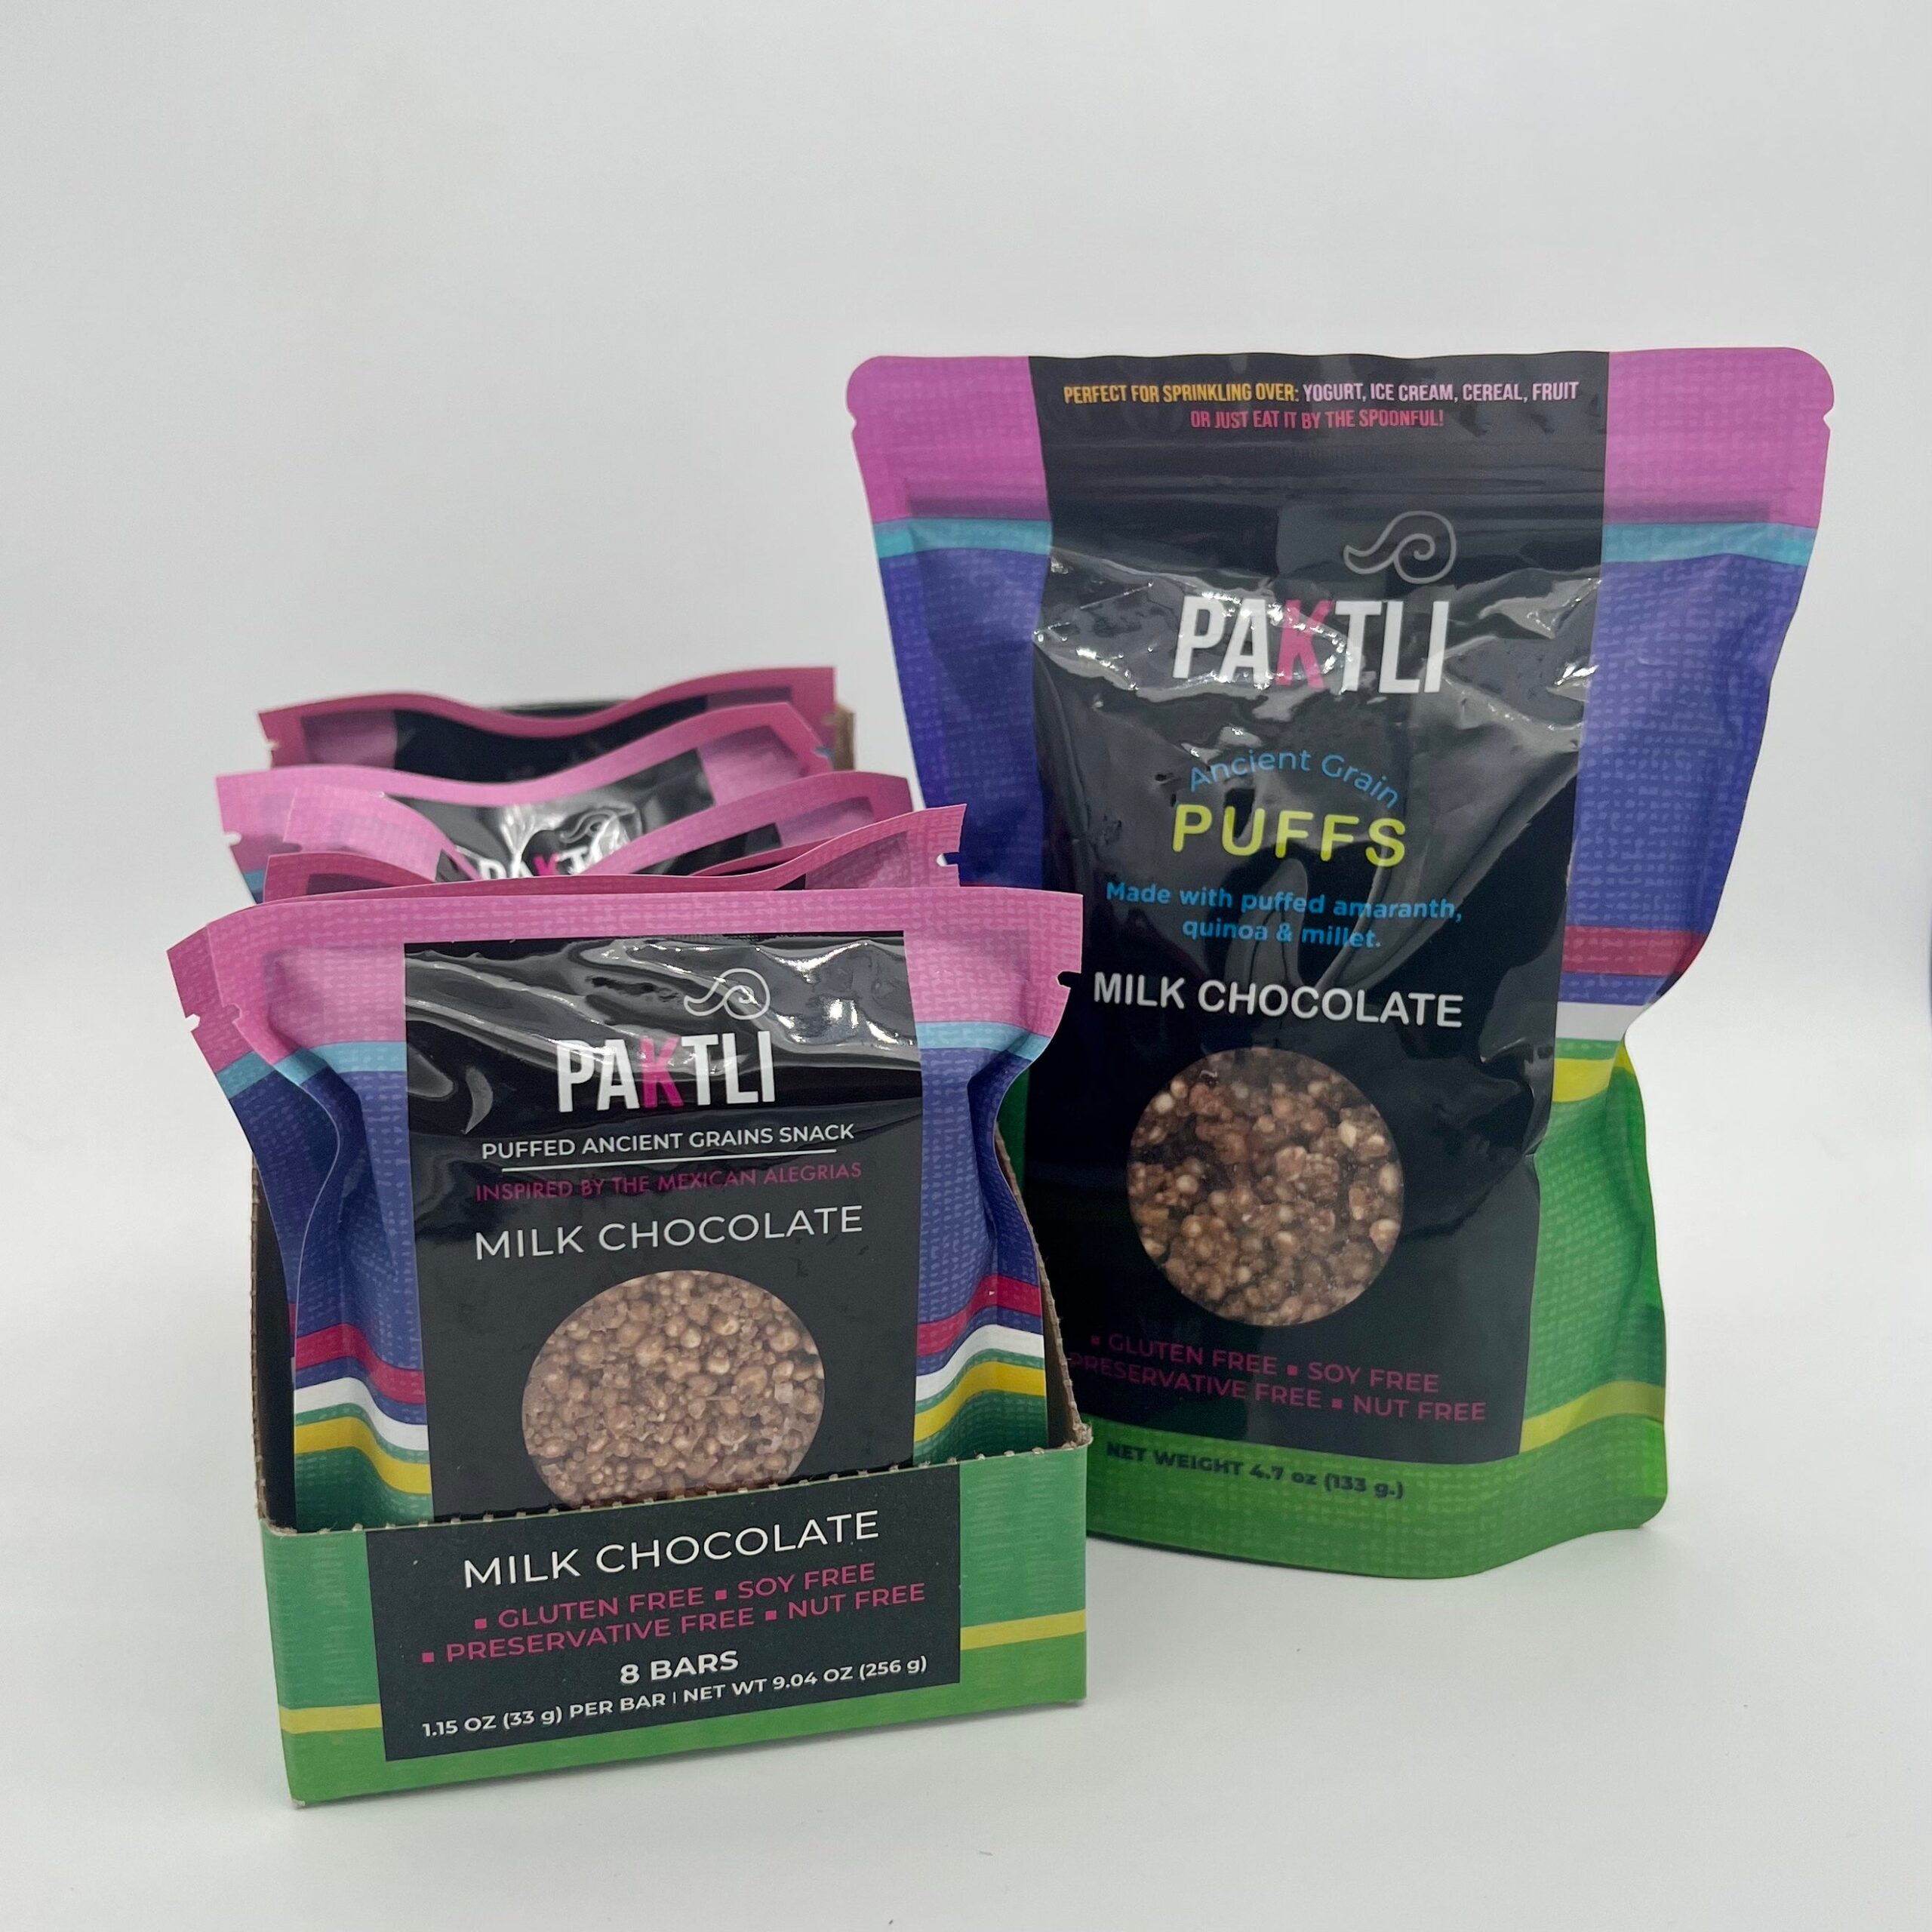 PAKTLI Puffed Ancient Grain Milk Chocolate Snack Cakes  and Puffs